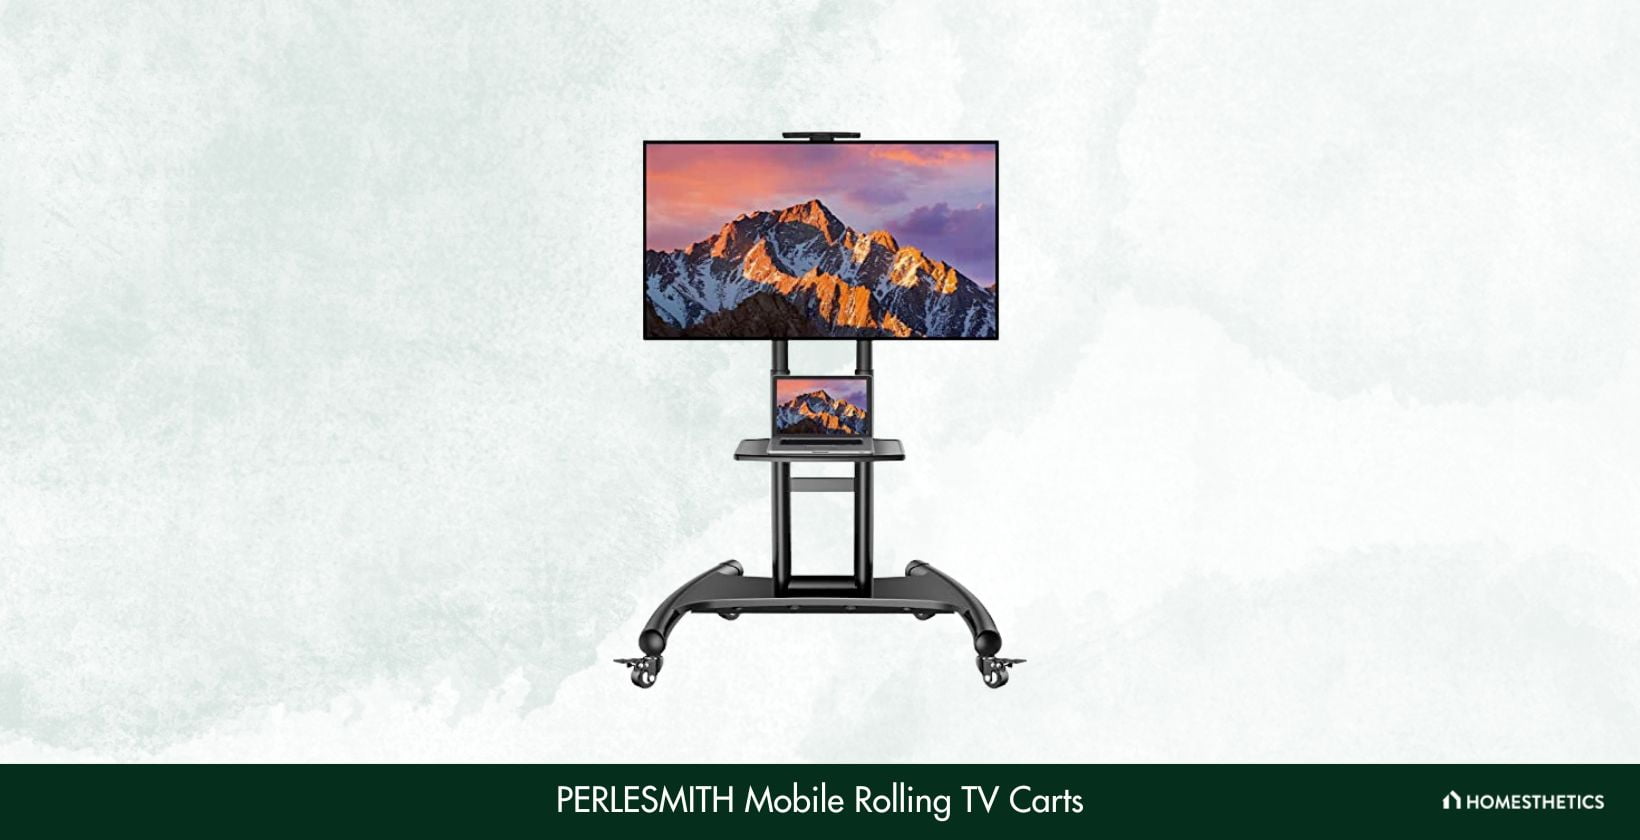 PERLESMITH Mobile Rolling TV Carts